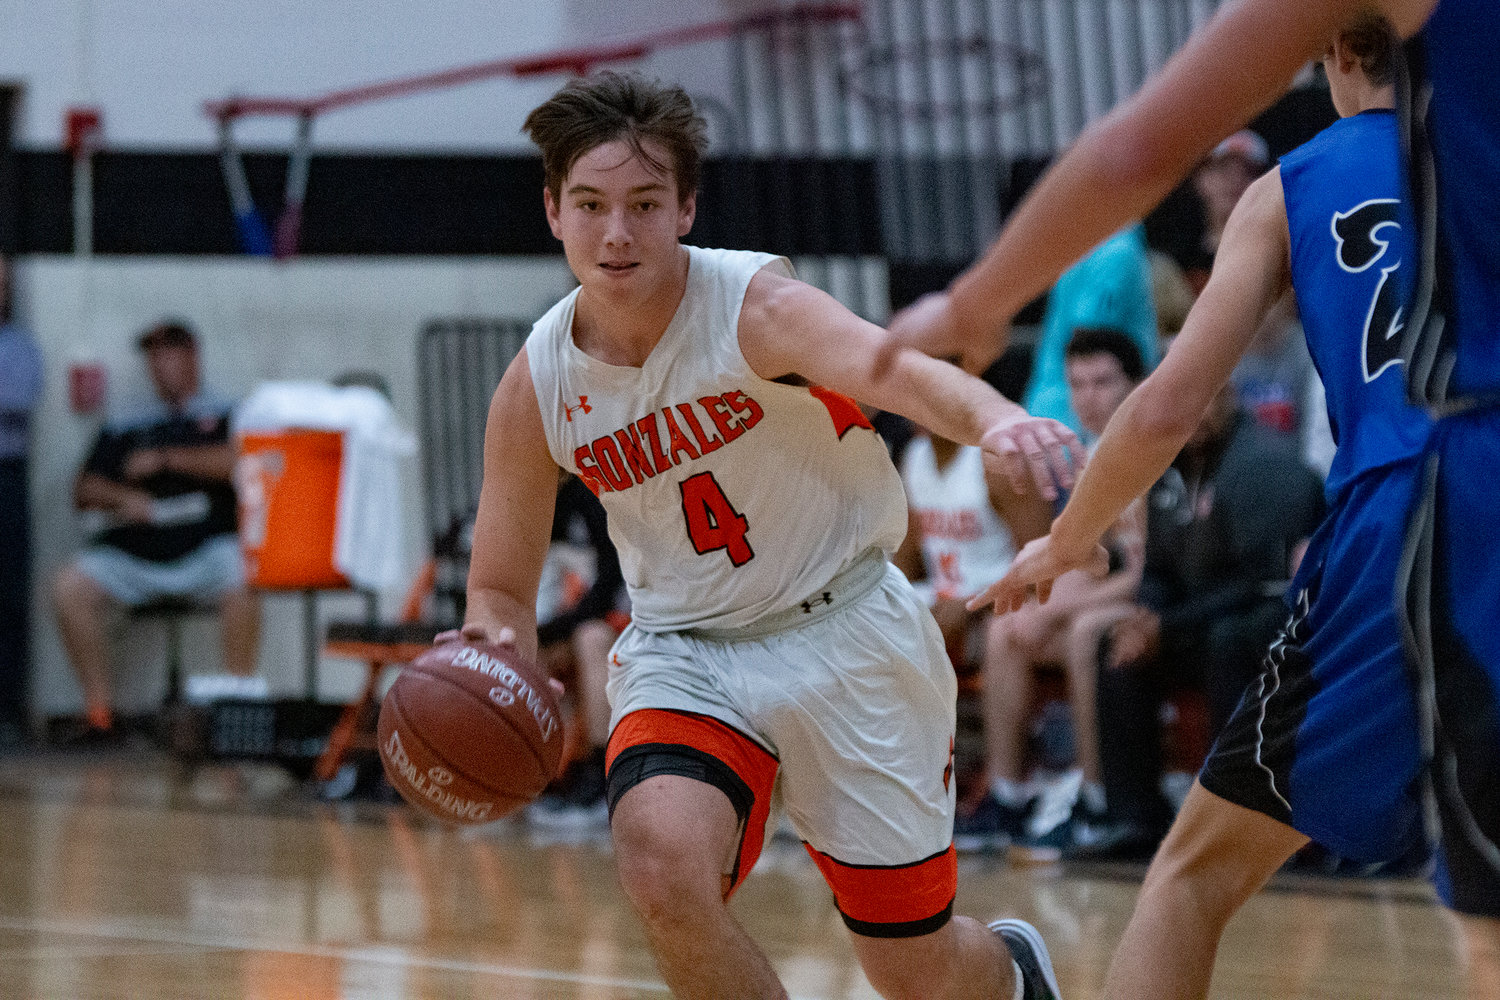 Will Knox (4) had 11 points in Gonzales' 20-point victory.